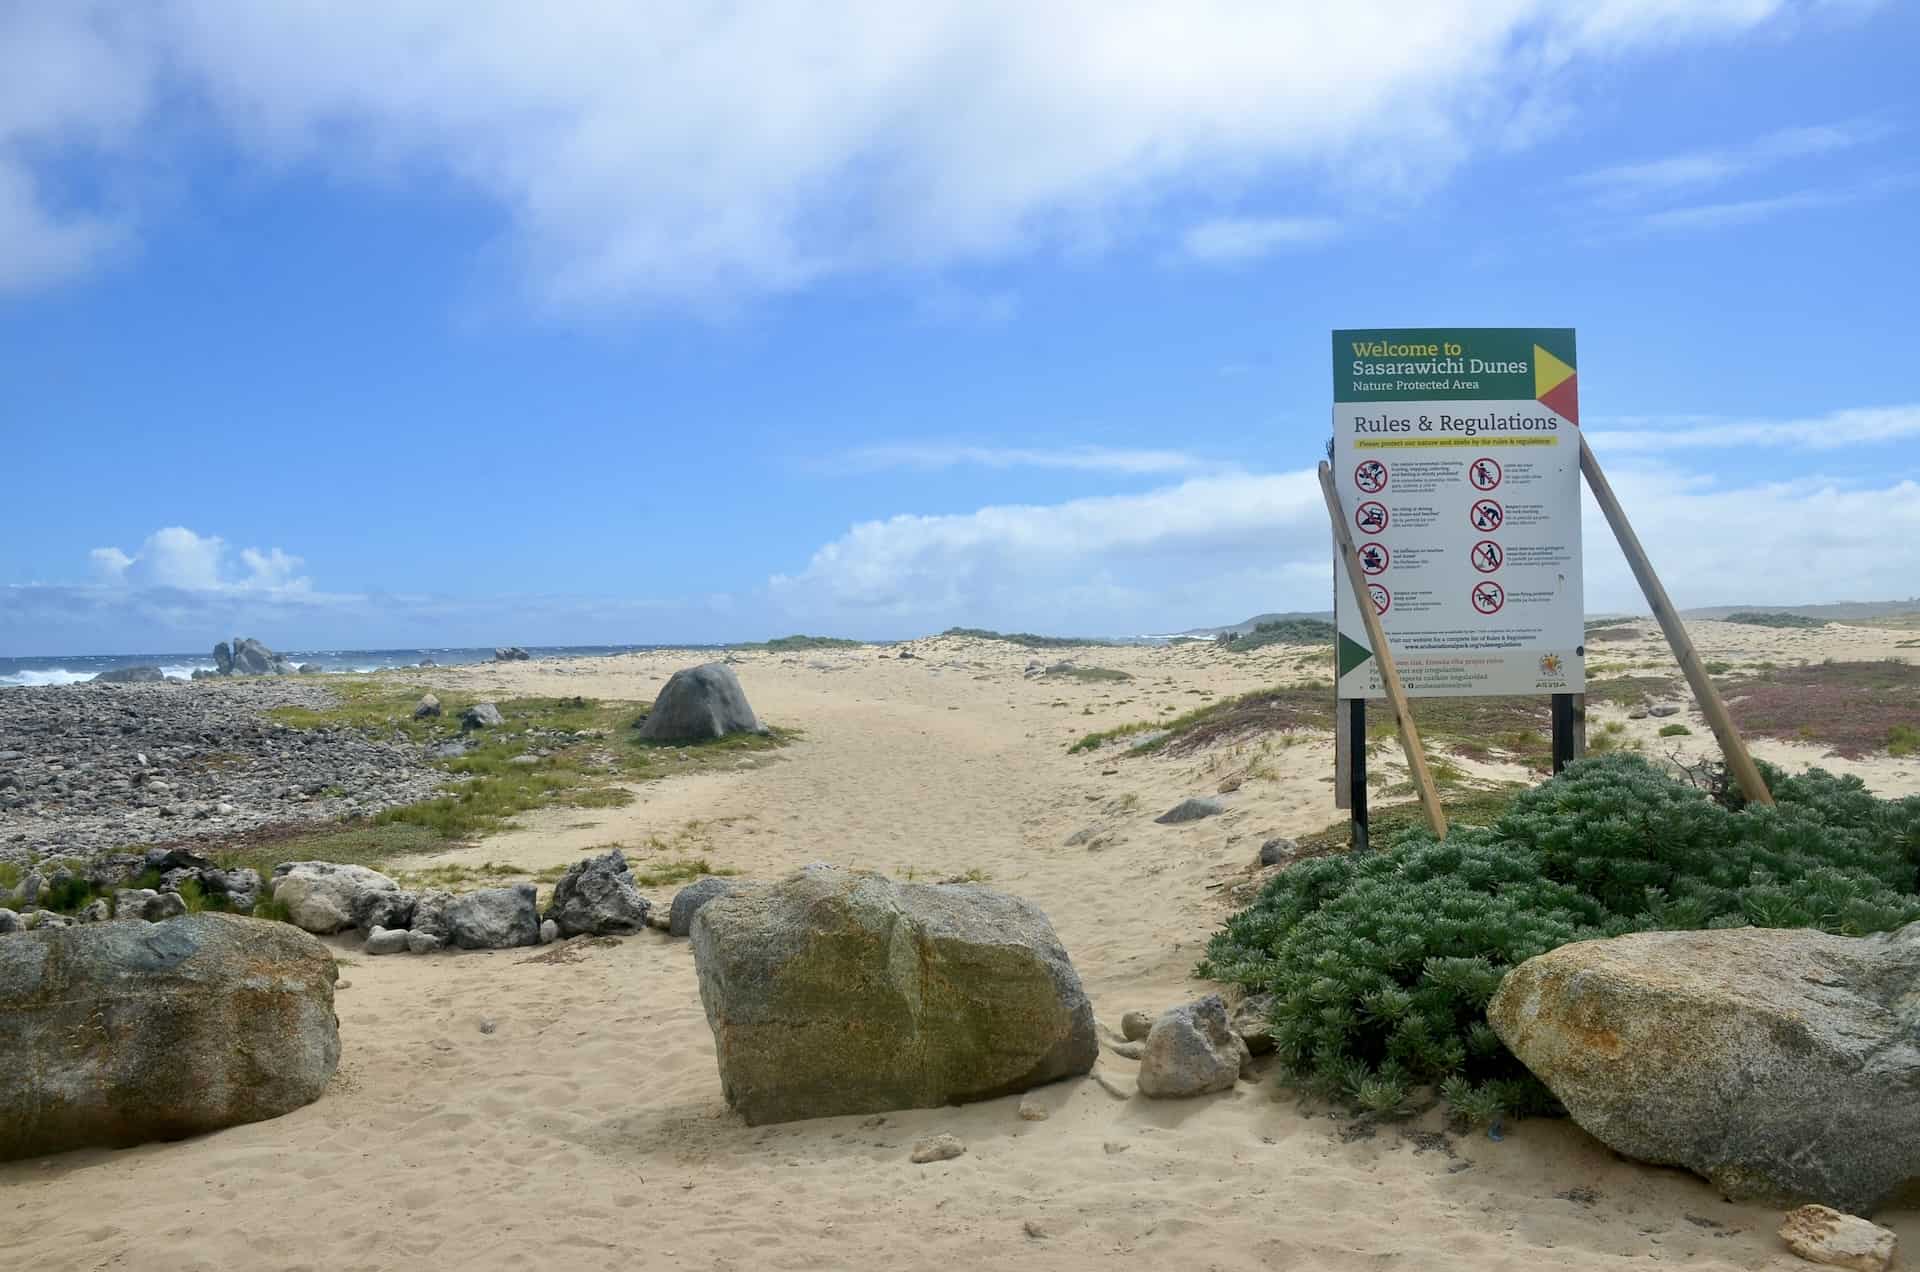 Entrance to the Sasarawichi Dunes at Westpunt Beach